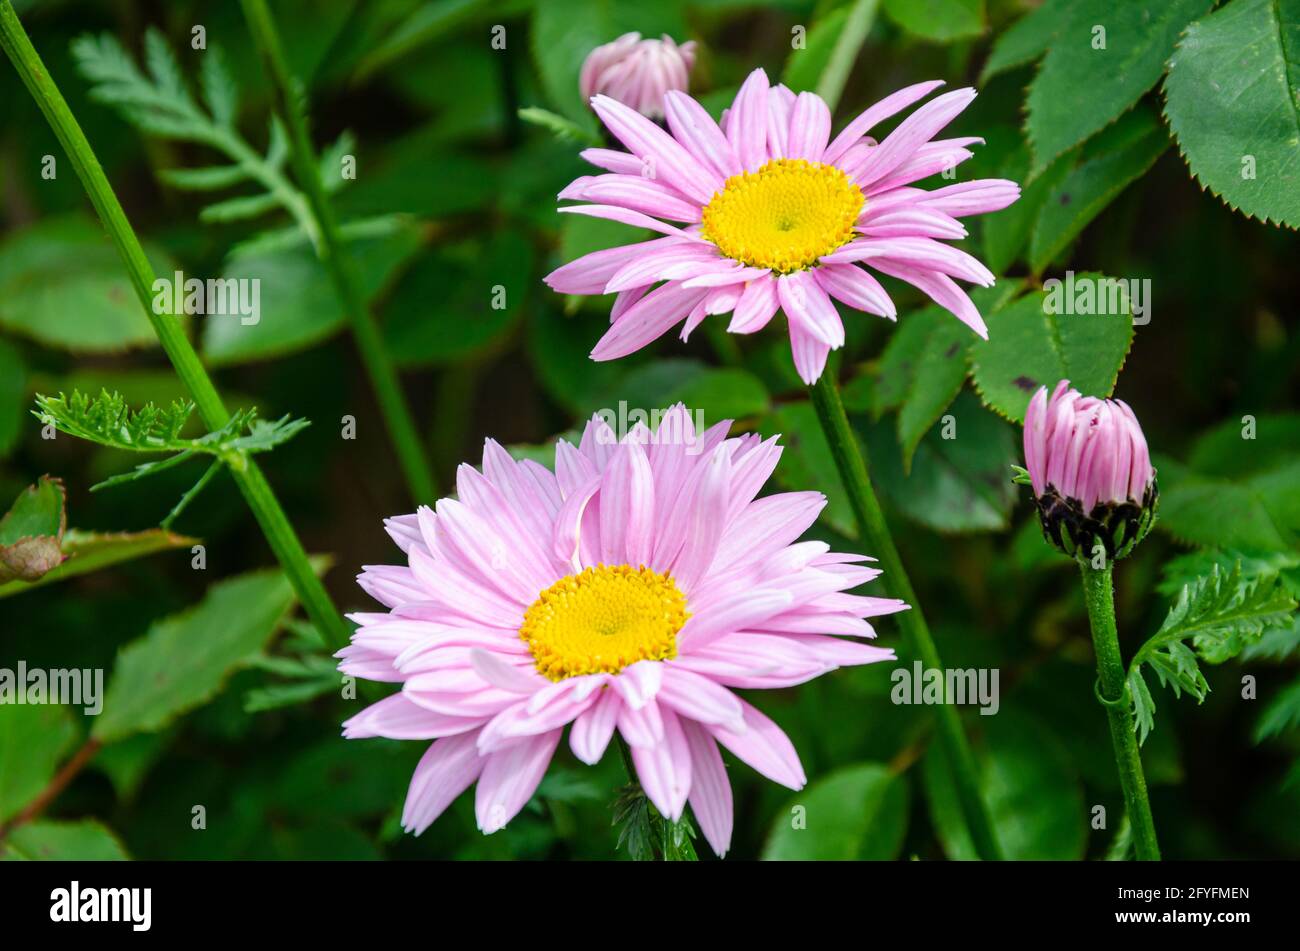 Close up view of pink pyrethum flowers in a garden. Stock Photo